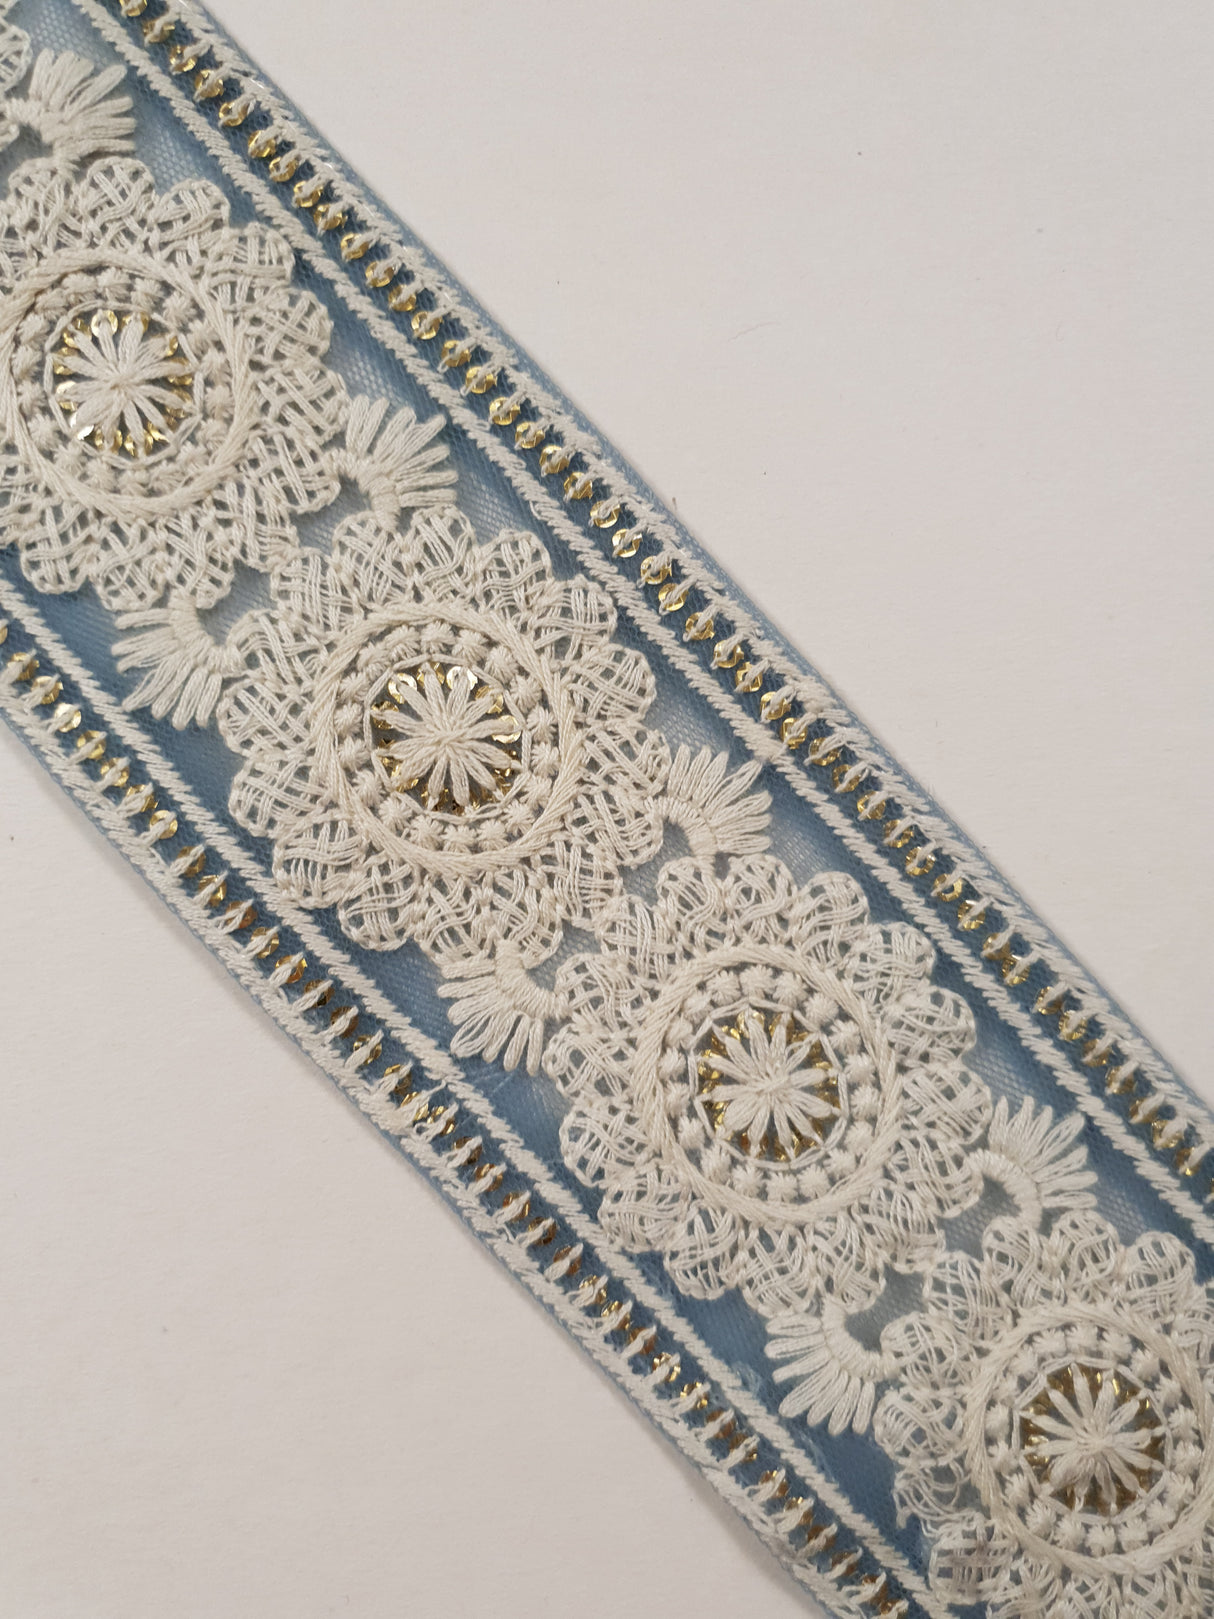 Embroidered Trim - 1 Meter - (ITR-1357)